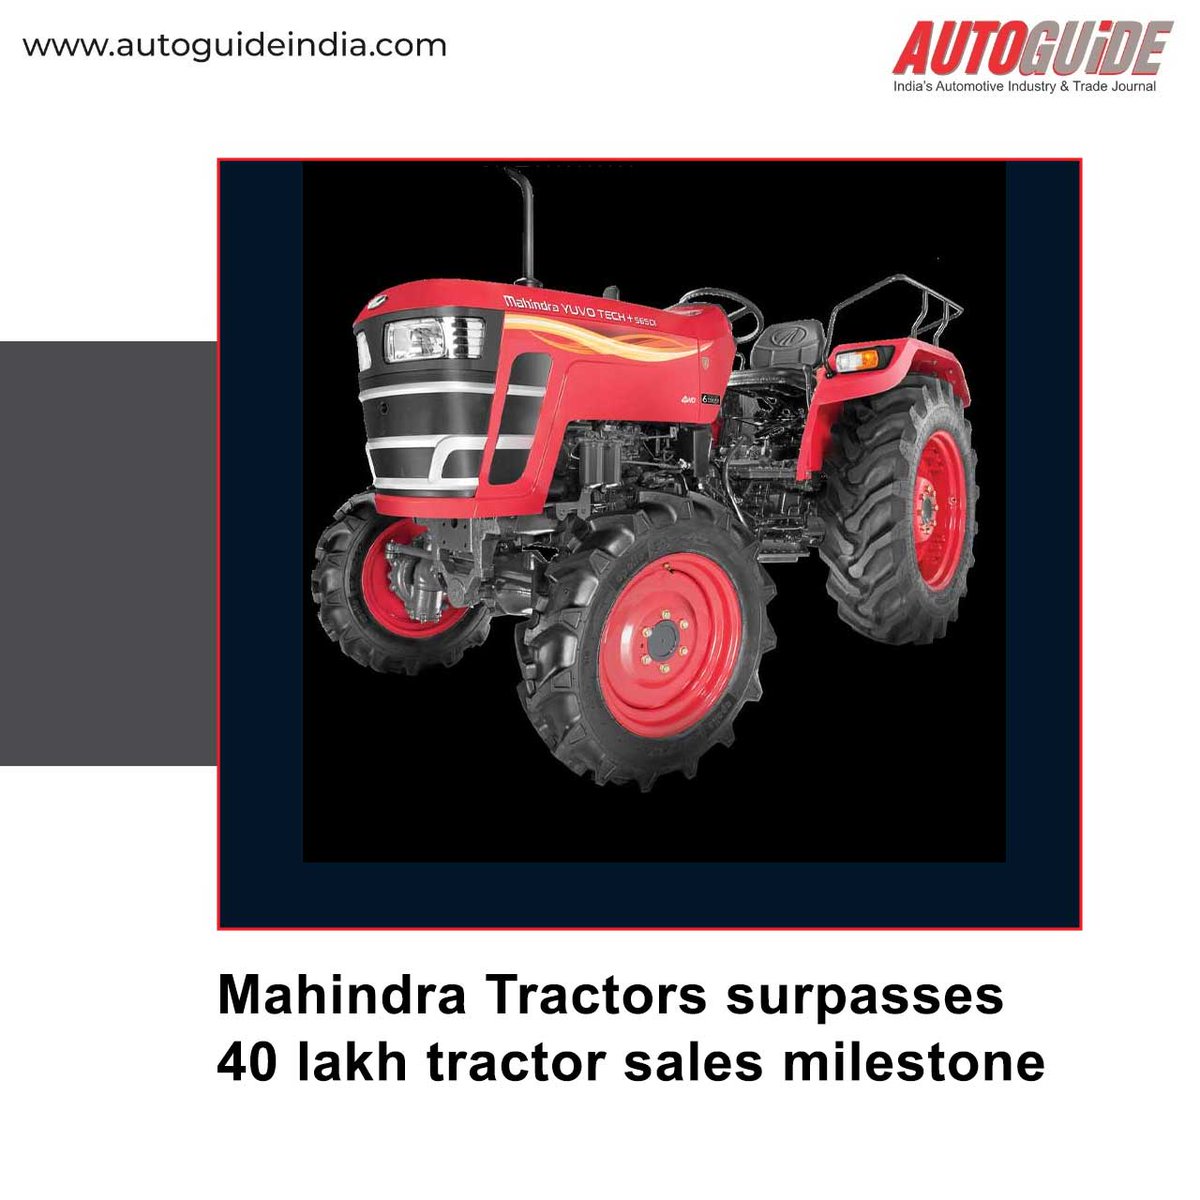 autoguideindia.com/awards-milesto…
Mahindra Tractors has reached a historic milestone in March 2024 by selling its 40 lakh unit tractor, demonstrating its longstanding leadership in the global tractor market. 
#MahindraGroup #MahindraTractors #milestone #MahindraTractorsales